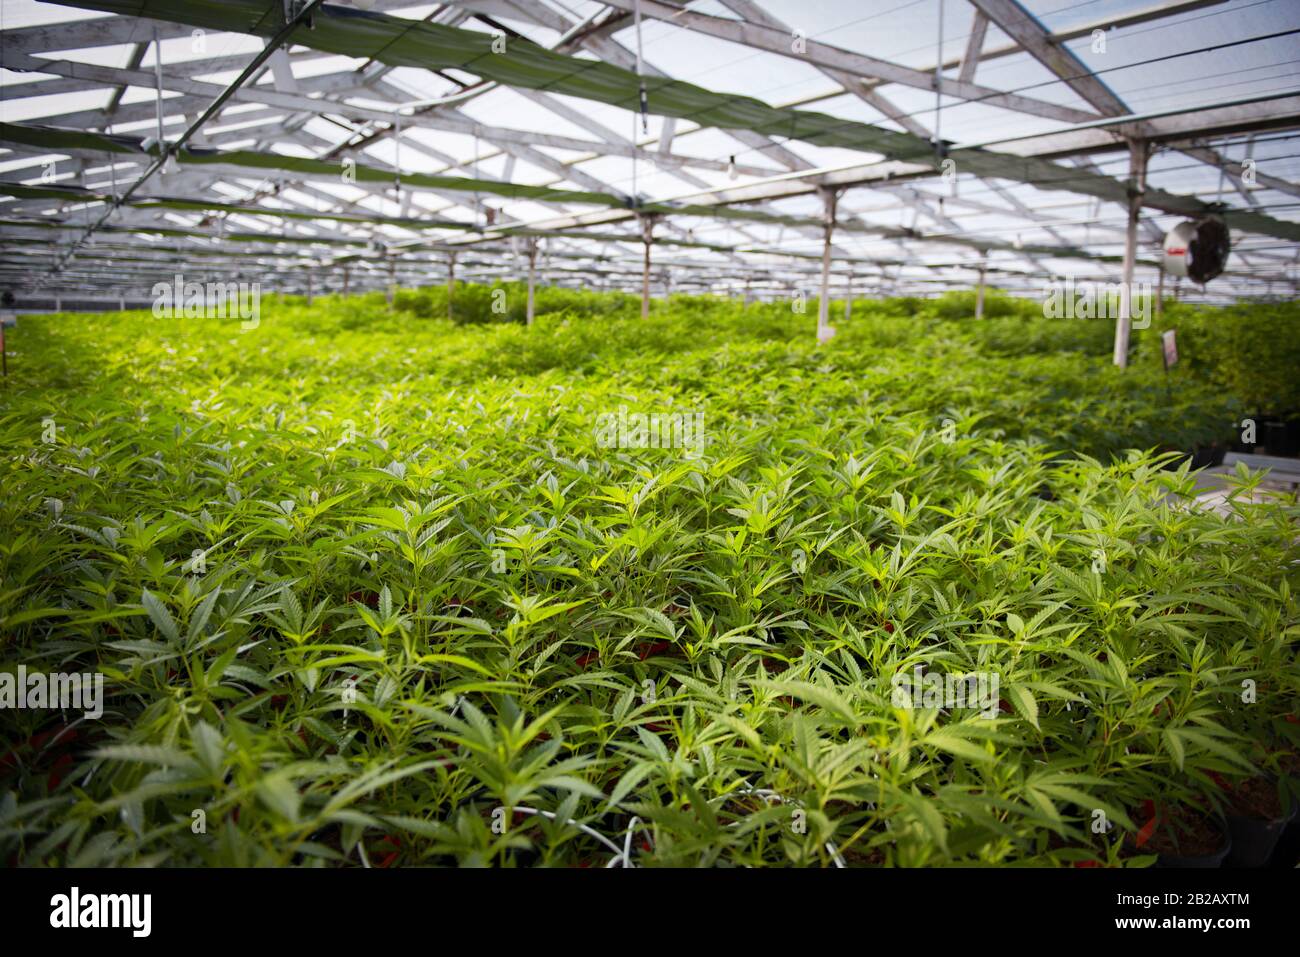 Greenhouse filled with cannabis plants, USA Stock Photo